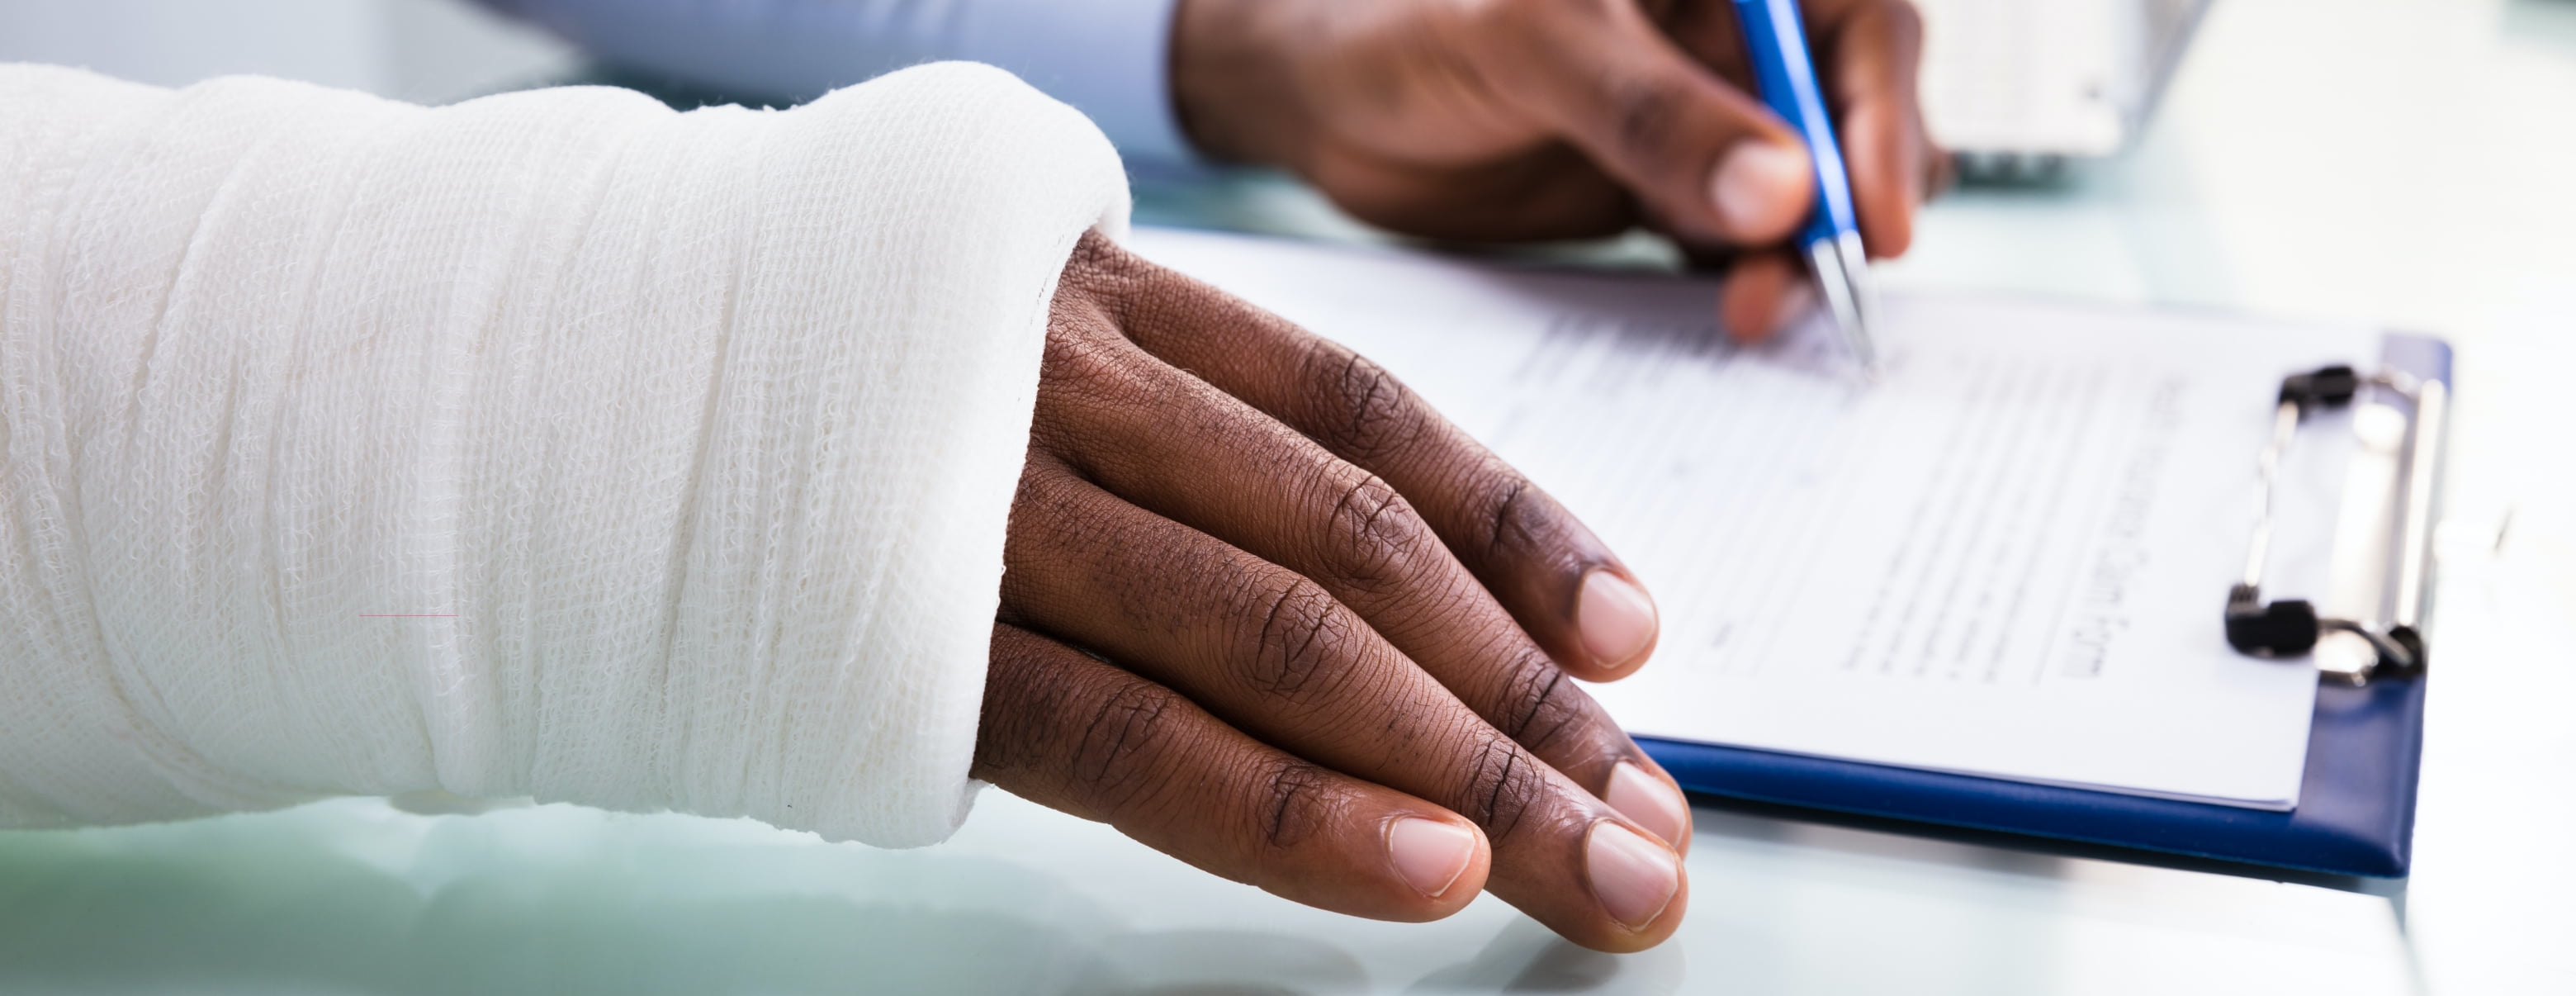 Hand injured in workers' compensation claim in Nevada